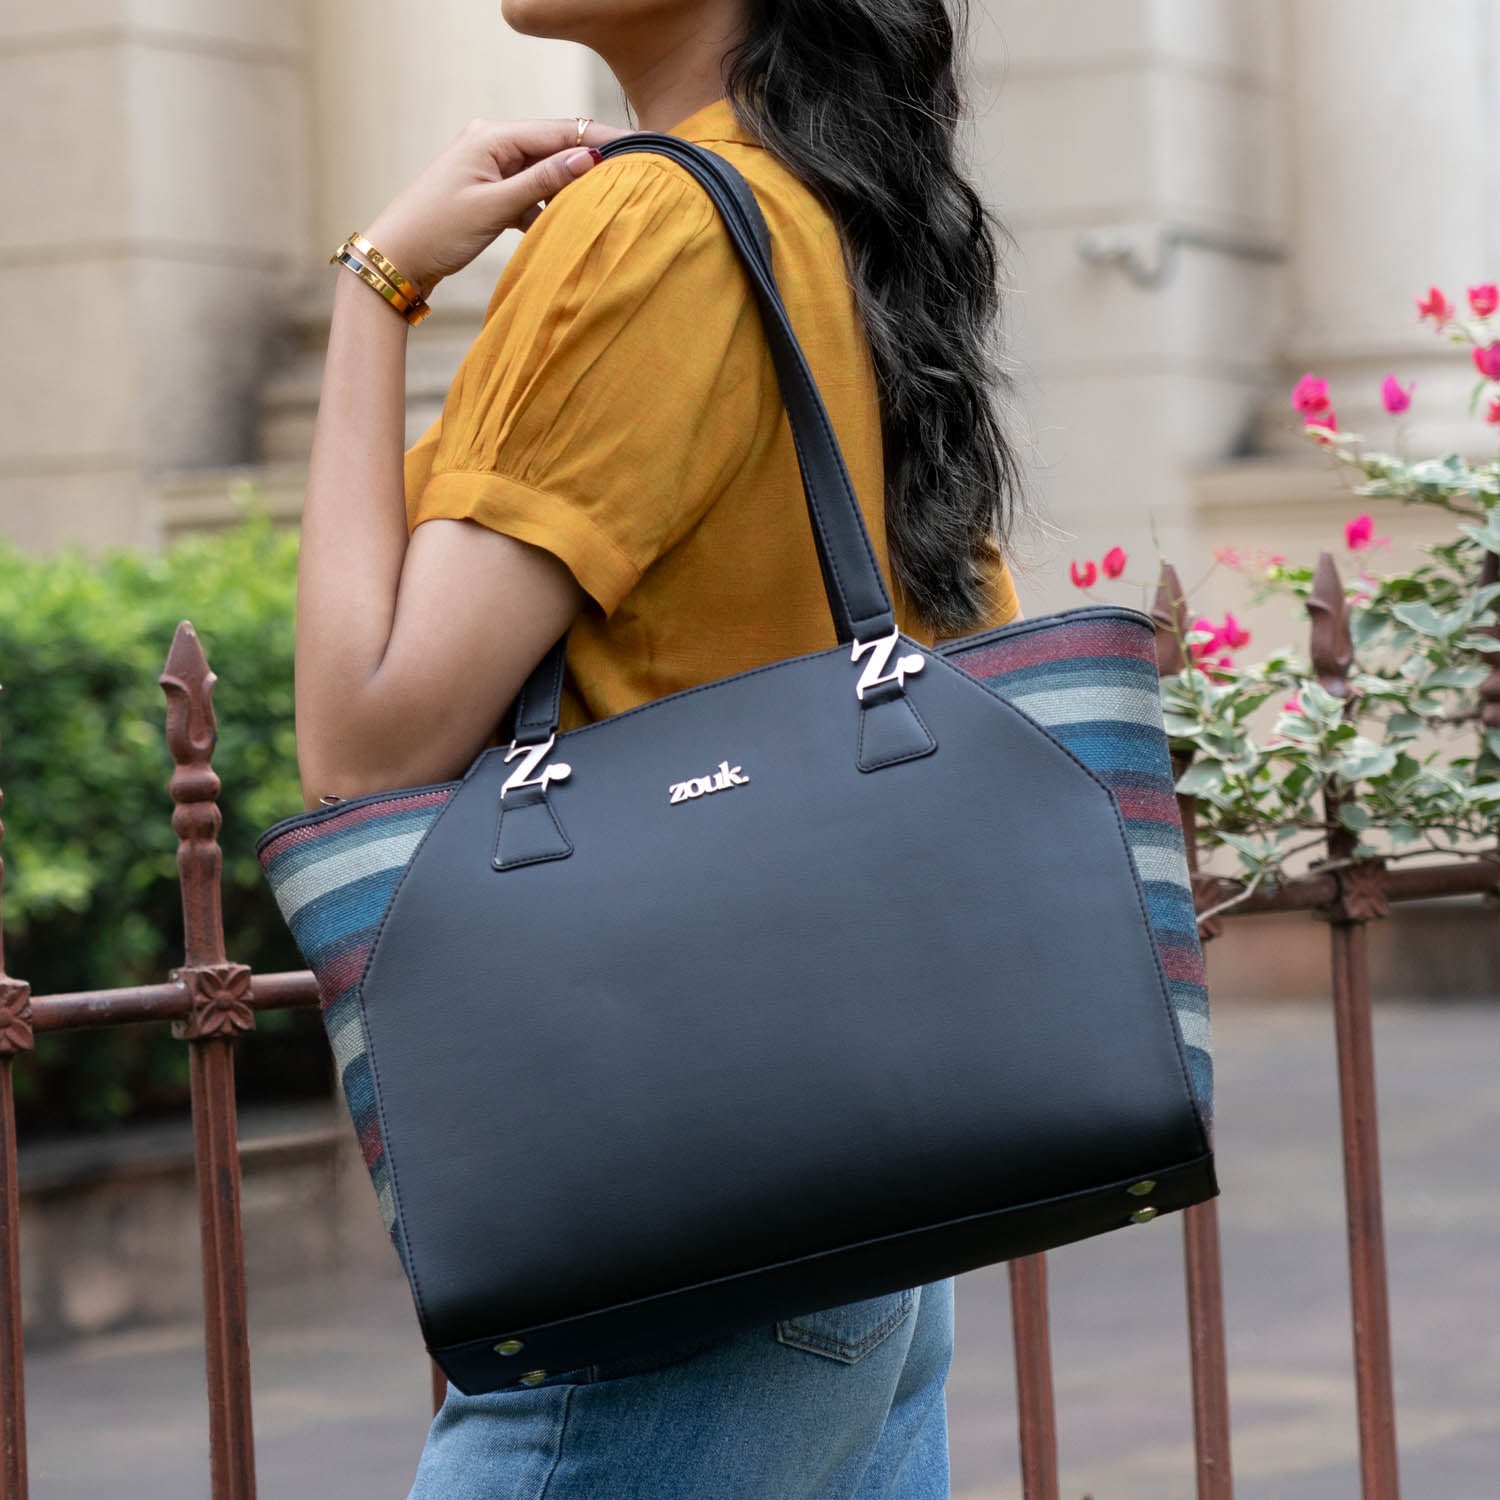 Myntra - Every occasion calls for a different bag! Pick... | Facebook